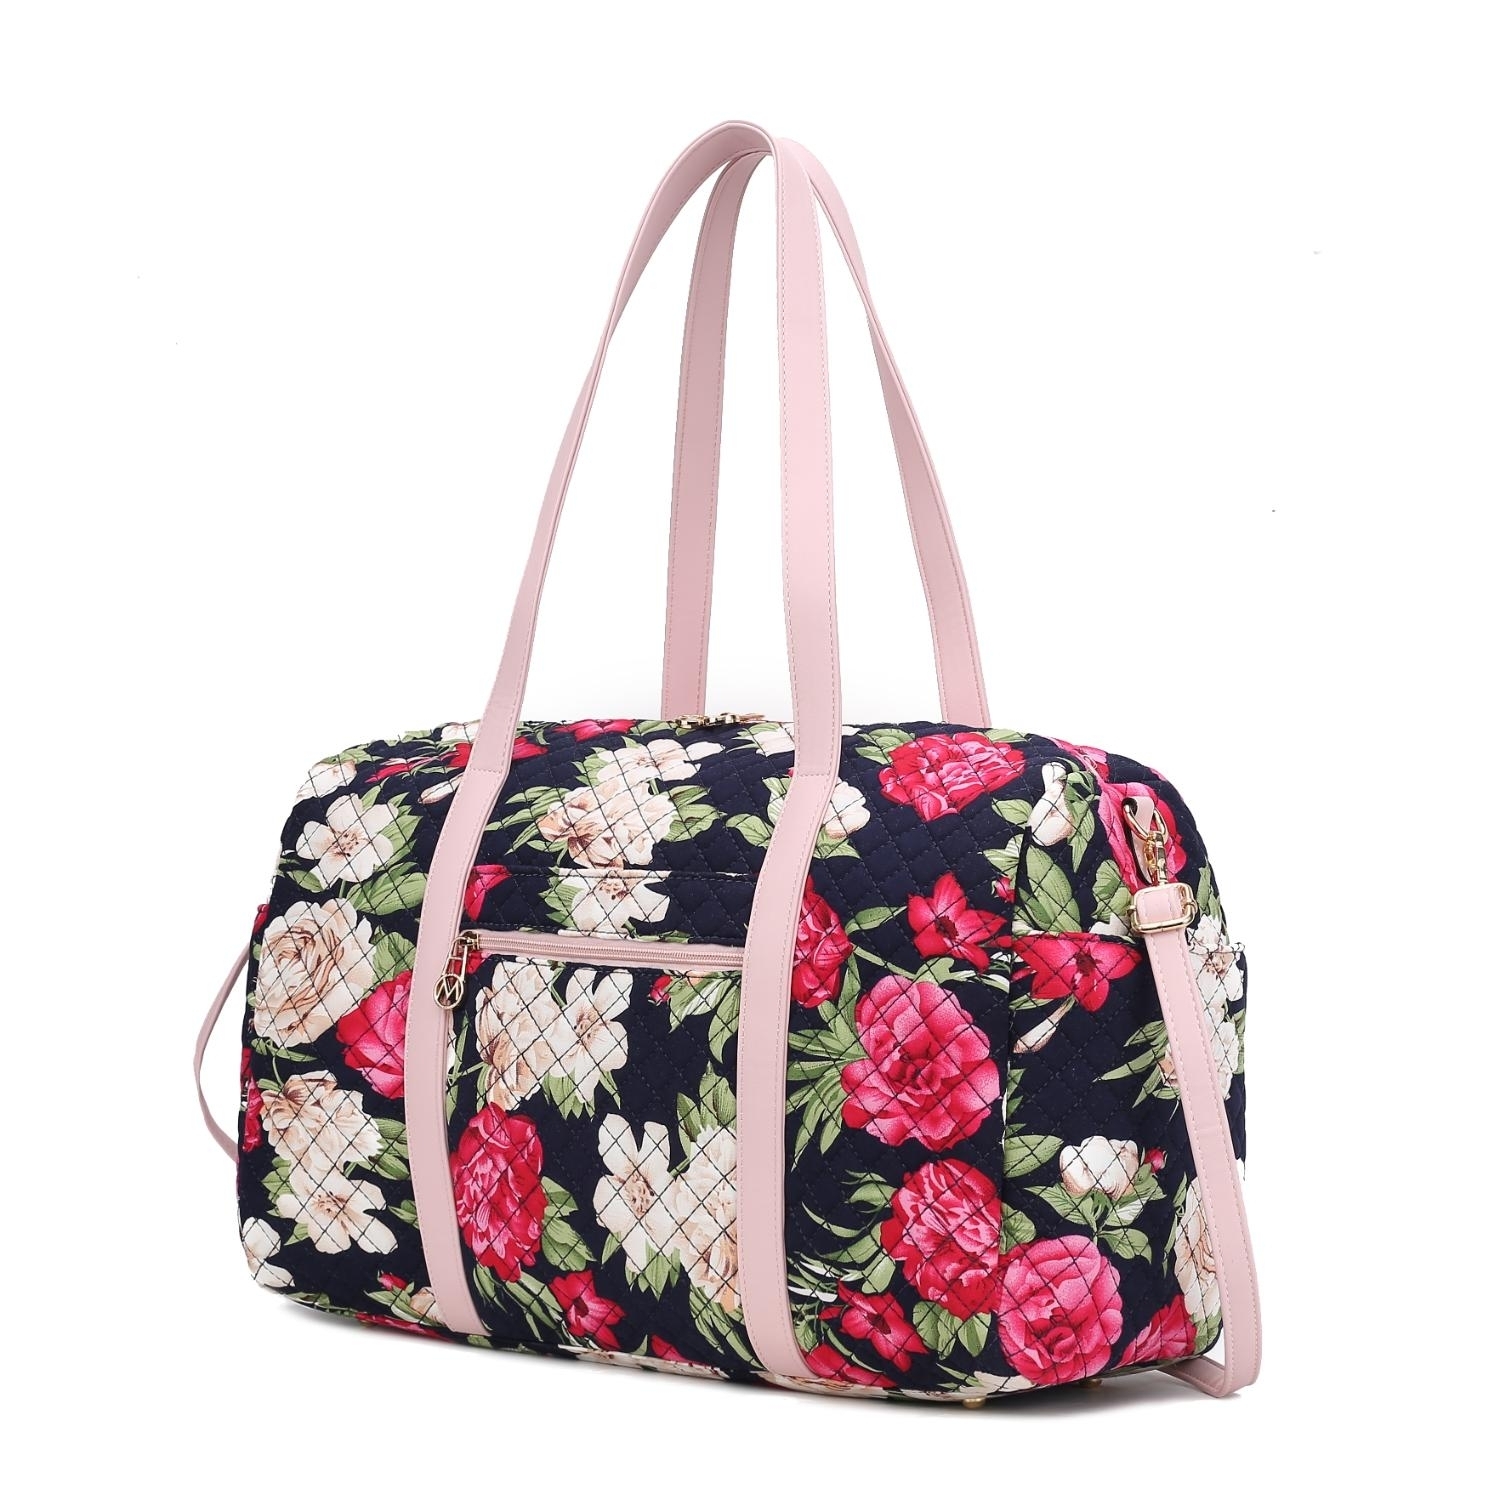 MKF Collection Khelani Quilted Cotton Botanical Pattern Women's Duffle Bag By Mia K - Navy